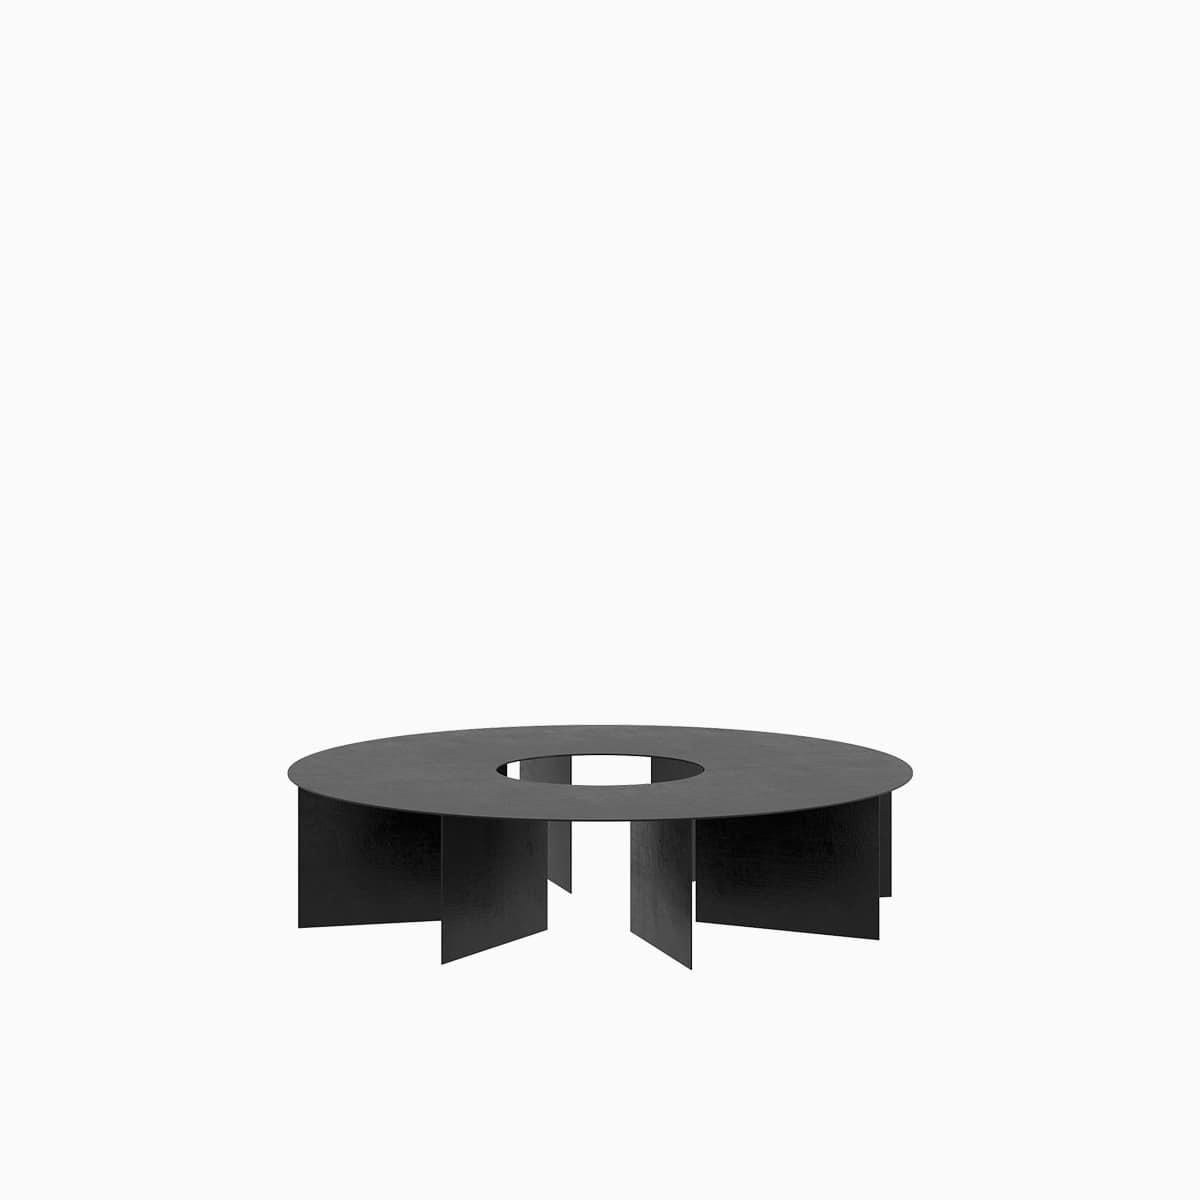 Conceptualized in 2023 by Leonardo Floresvillar, The Reel center tables explore repetition and sequence while functioning as a coffee table or as a sculpture itself, suitable for both indoor and outdoor.

